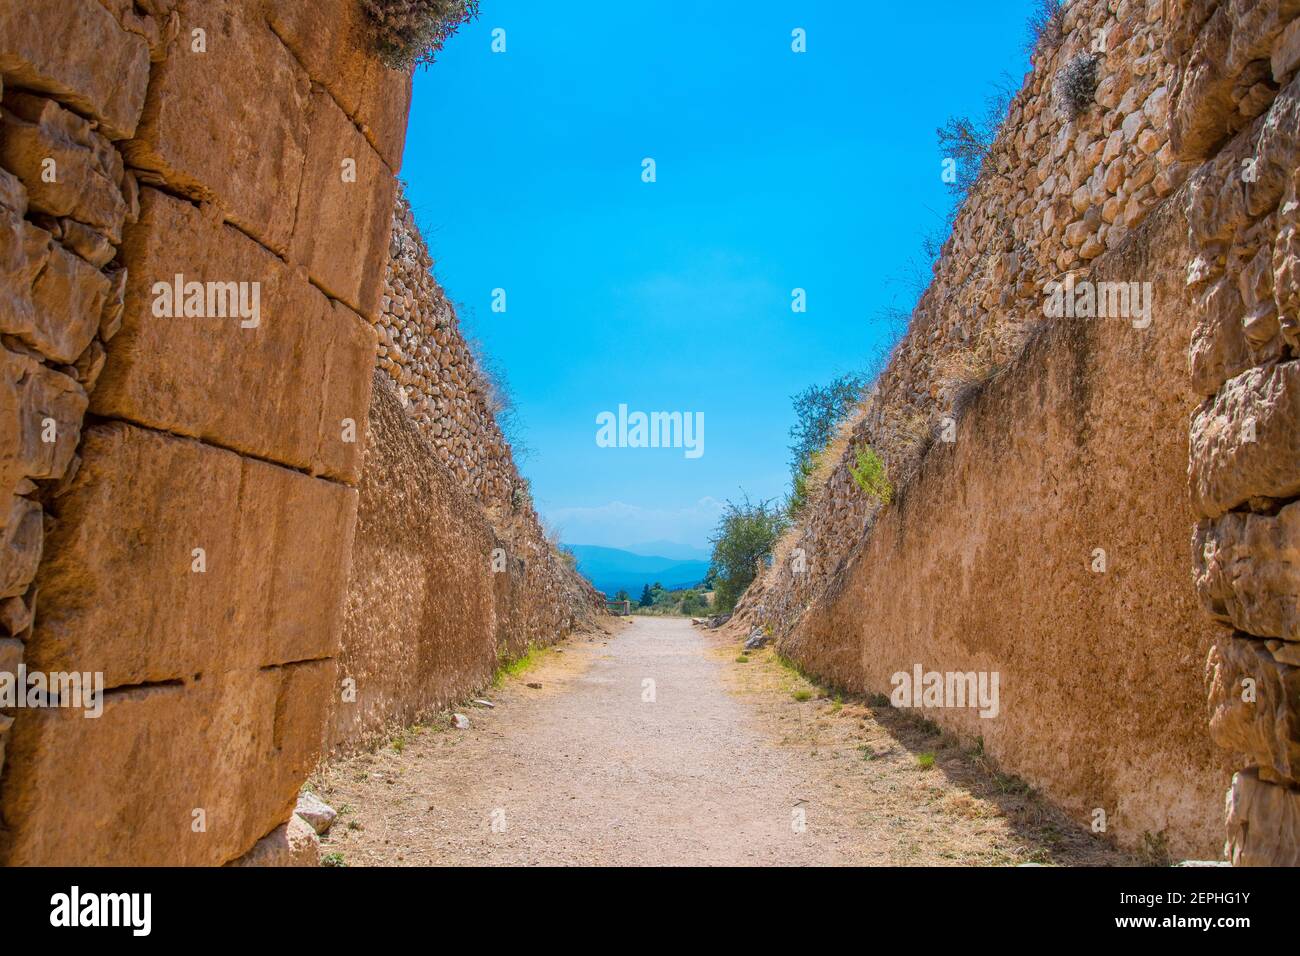 Coming out from the 'Treasury of Atreus' or 'Tomb of Agamemnon' of the citadel of Mycenae. Archaeological site of Mycenae in Peloponnese, Greece Stock Photo